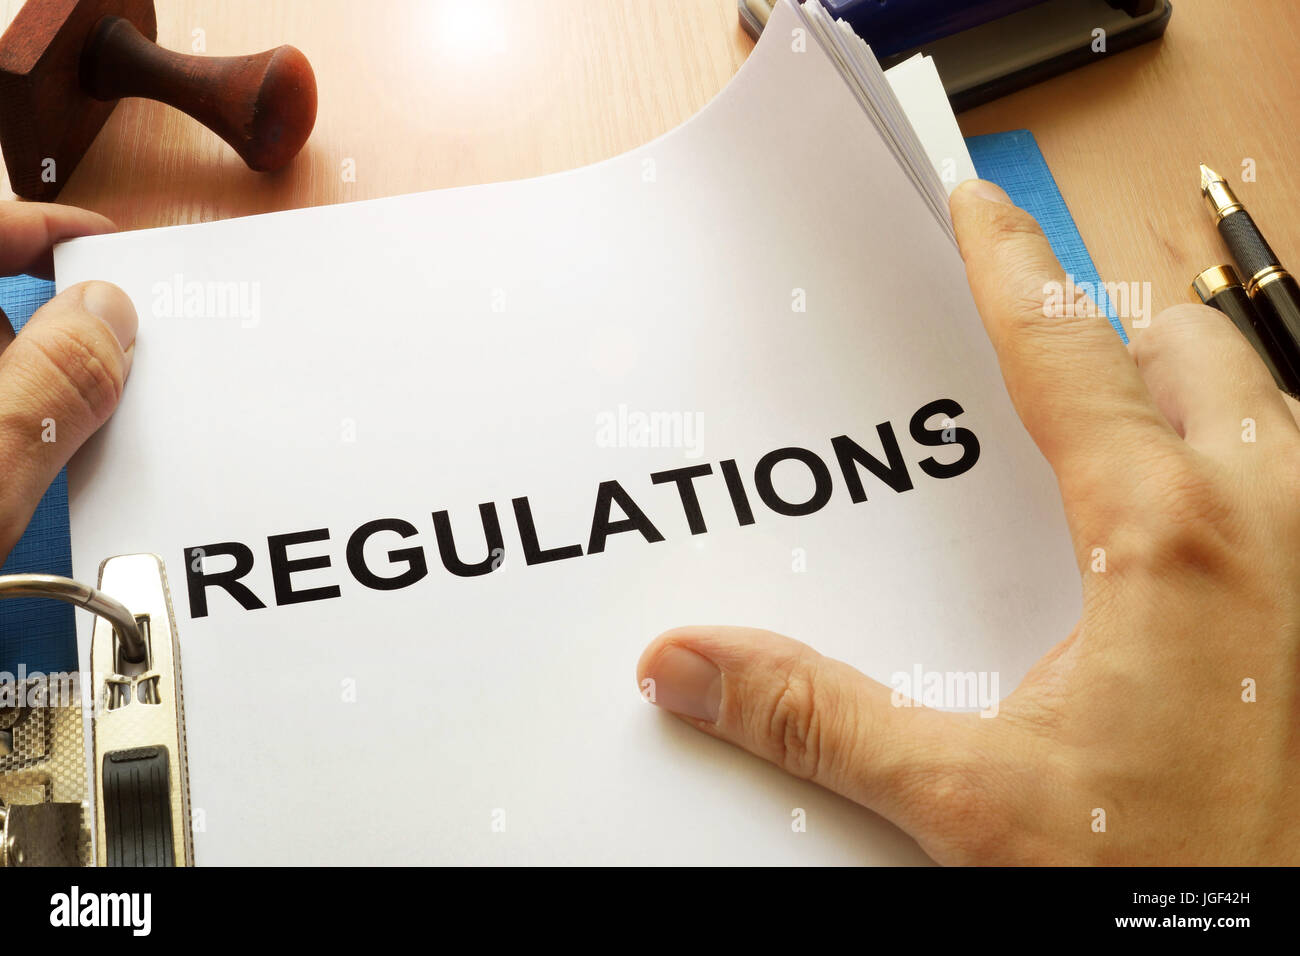 Documents with title Regulations on a table. Stock Photo